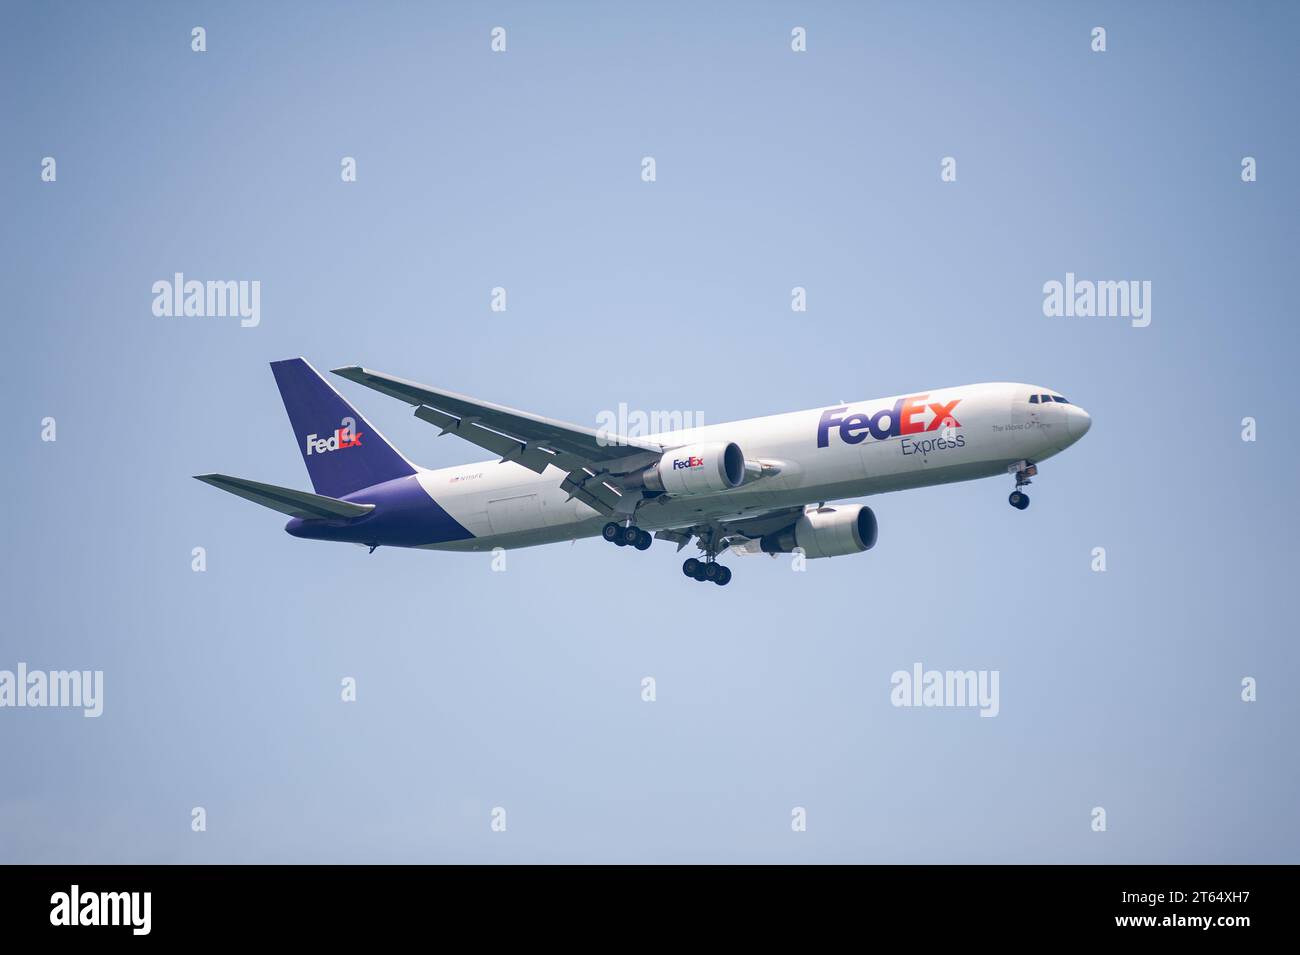 30.07.2023, Singapore, Republic of Singapore, Asia - A Boeing 767-300F freighter aircraft of the American airline company Federal Express (FedEx) with Stock Photo